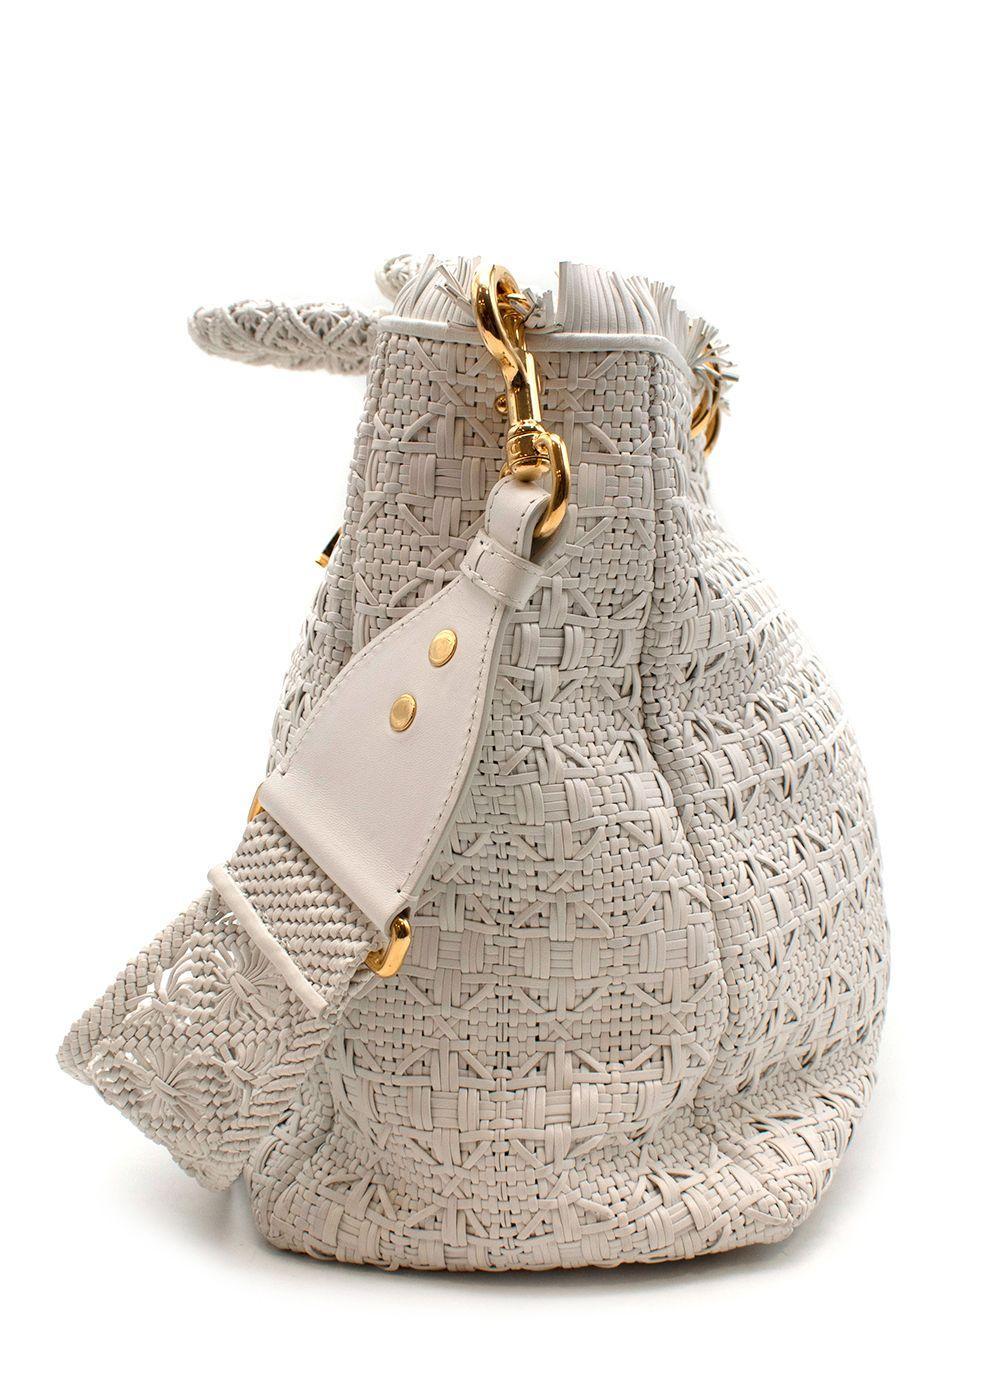 Dior Lady Dior White Woven Leather Bag  1